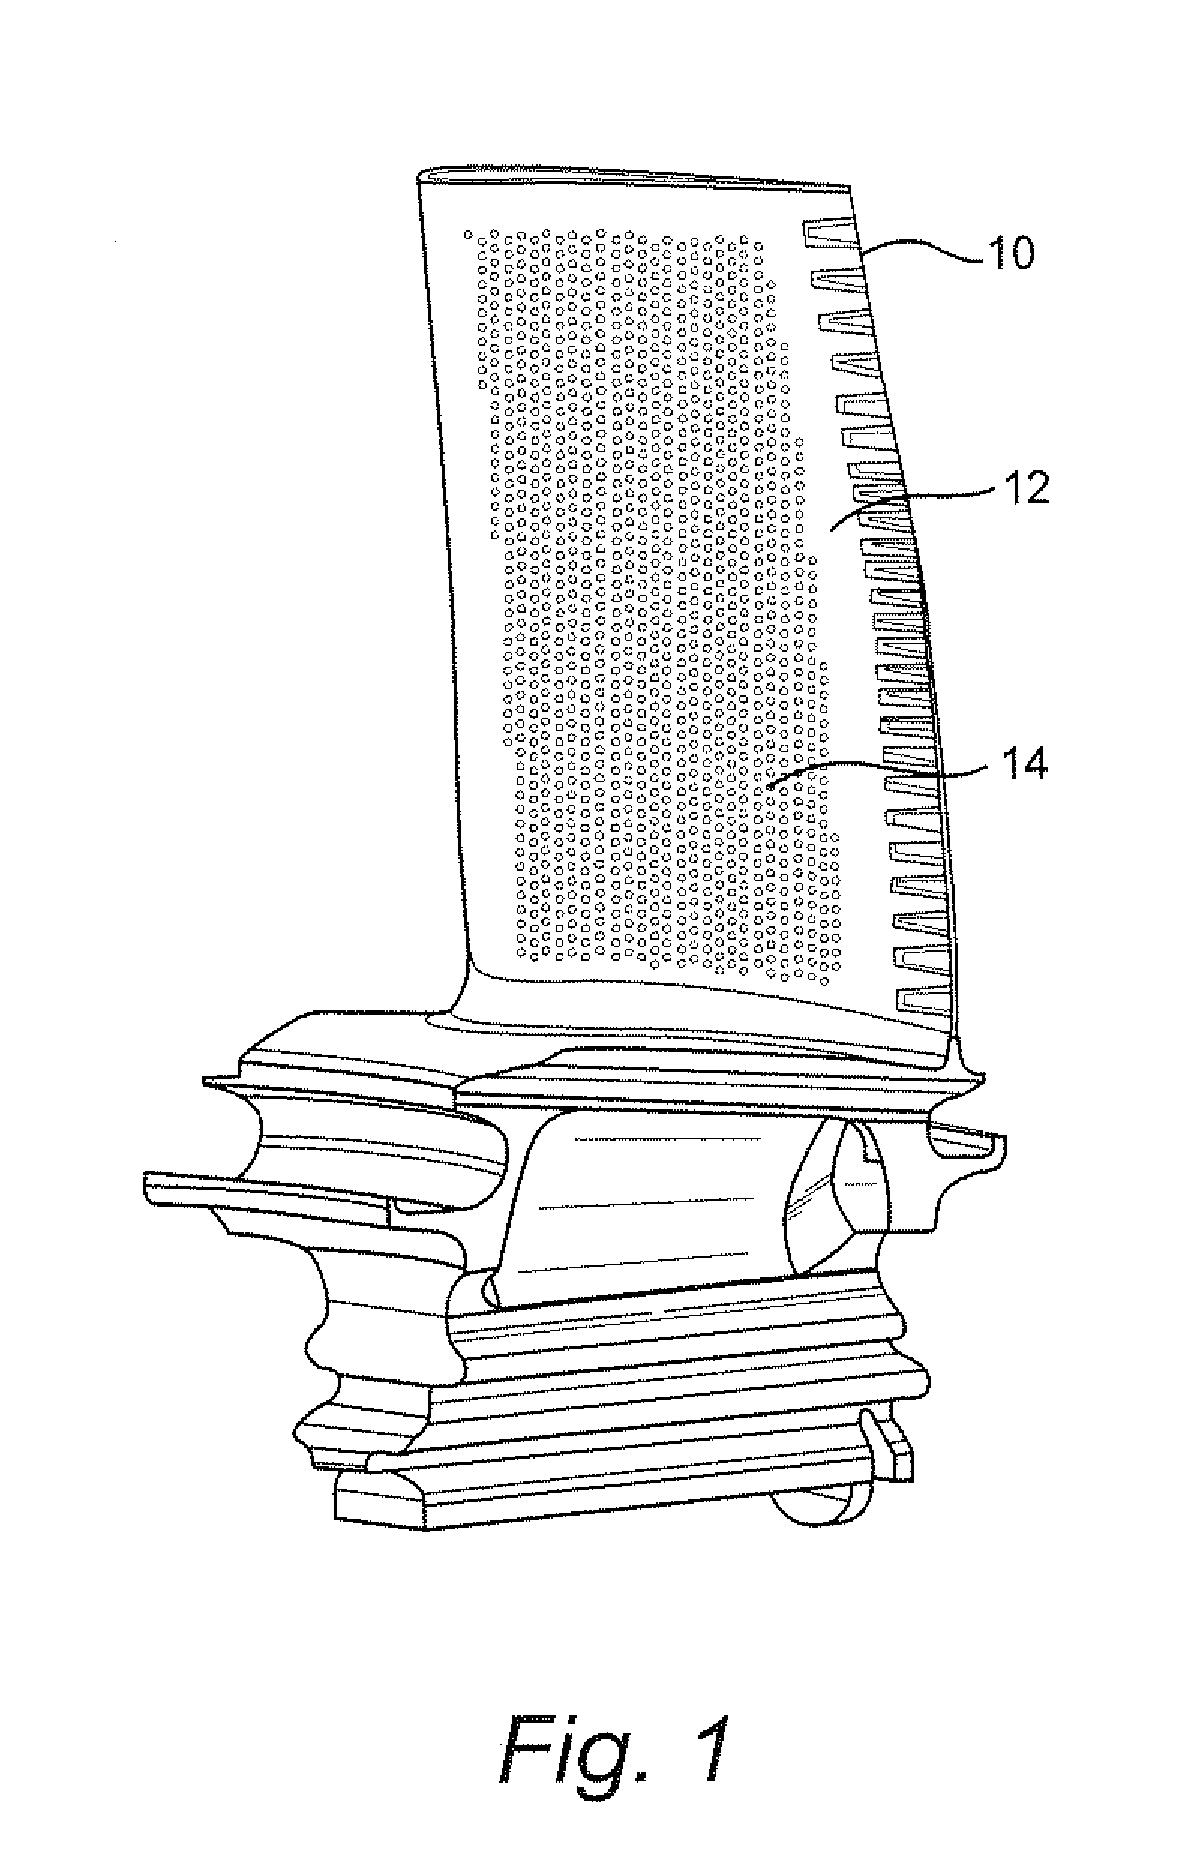 Vibration damping novel surface structures and methods of making the same